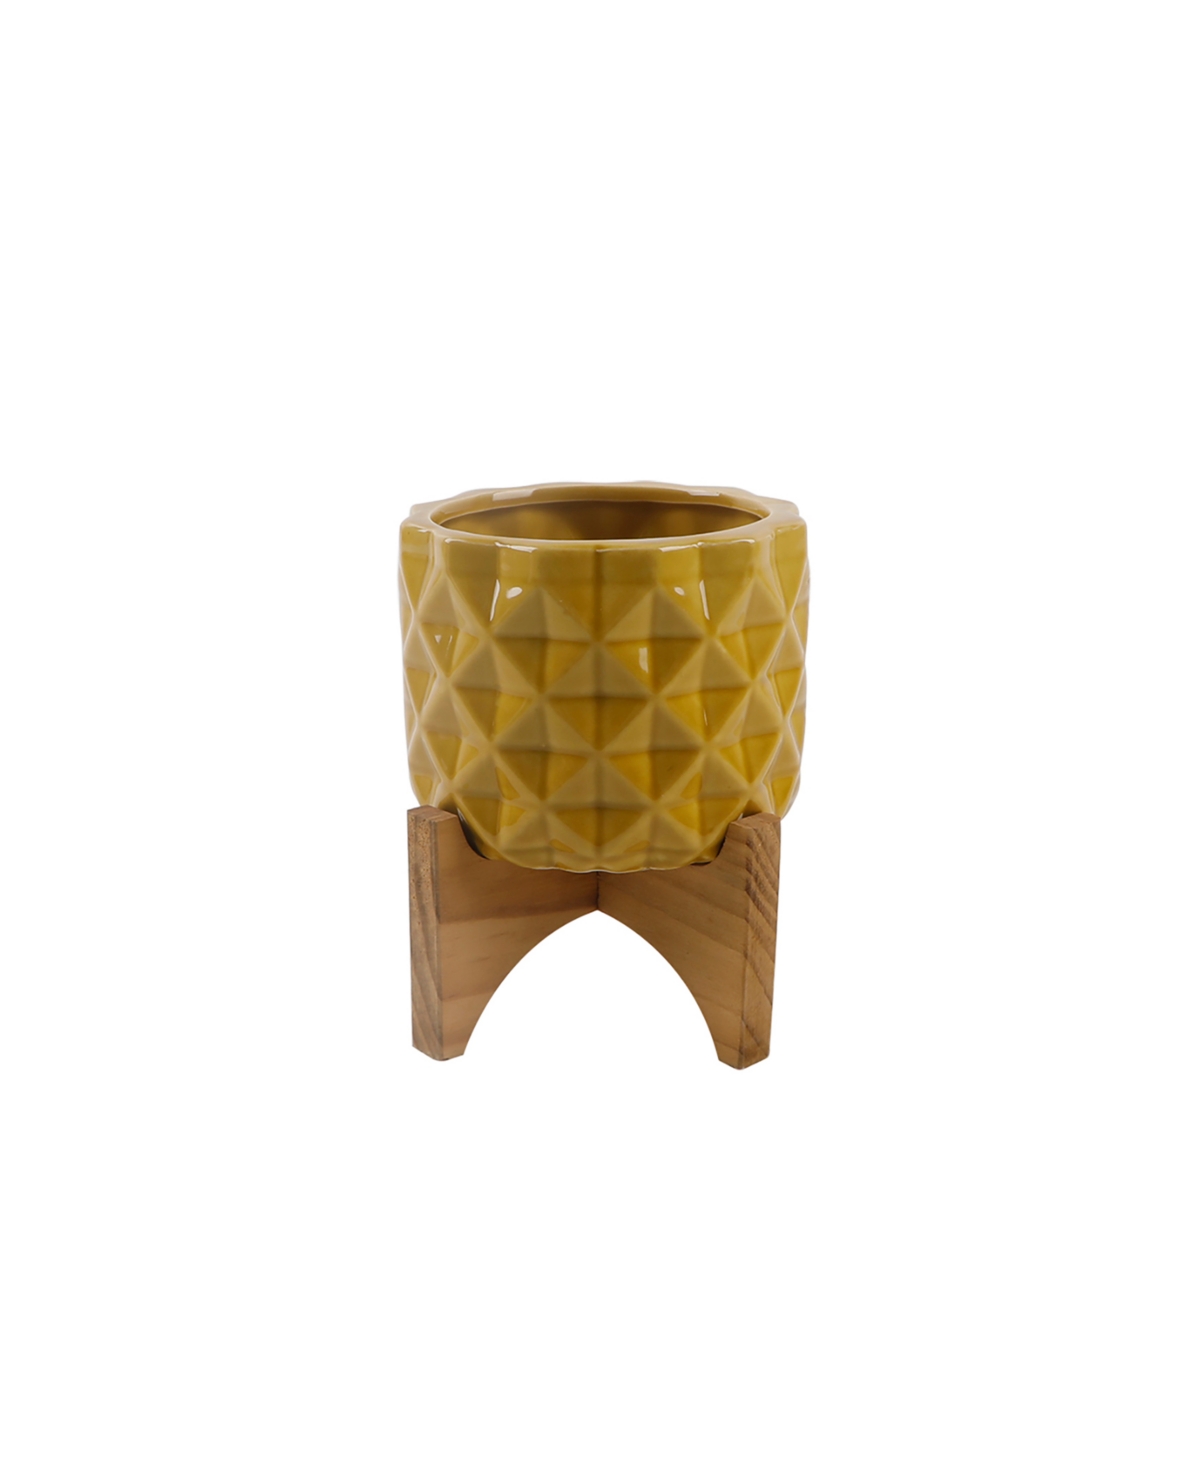 Gl Ceramic Dimple Planter on Wood Stand, 5" - Mustard